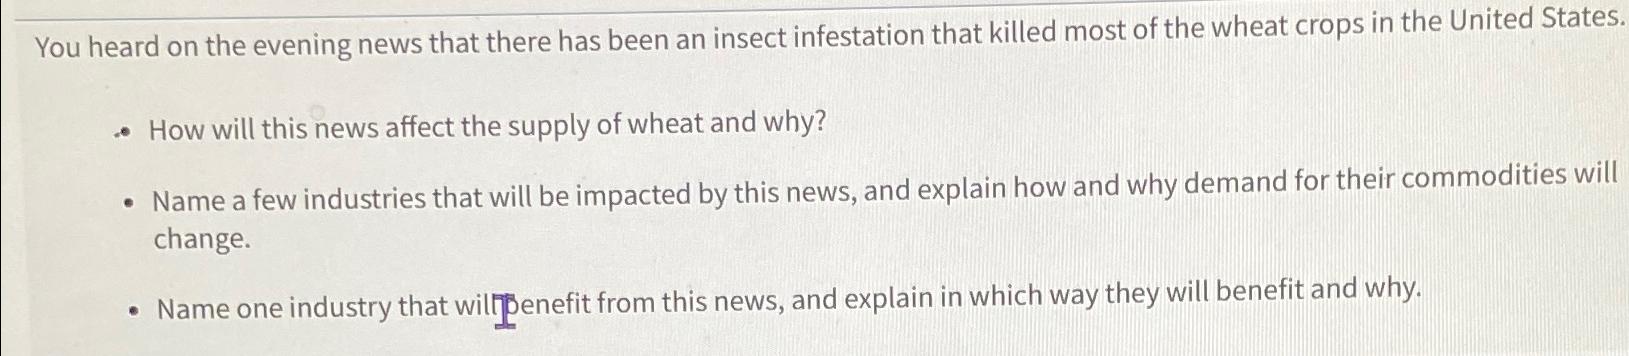 You heard on the evening news that there has been an insect infestation that killed most of the wheat crops